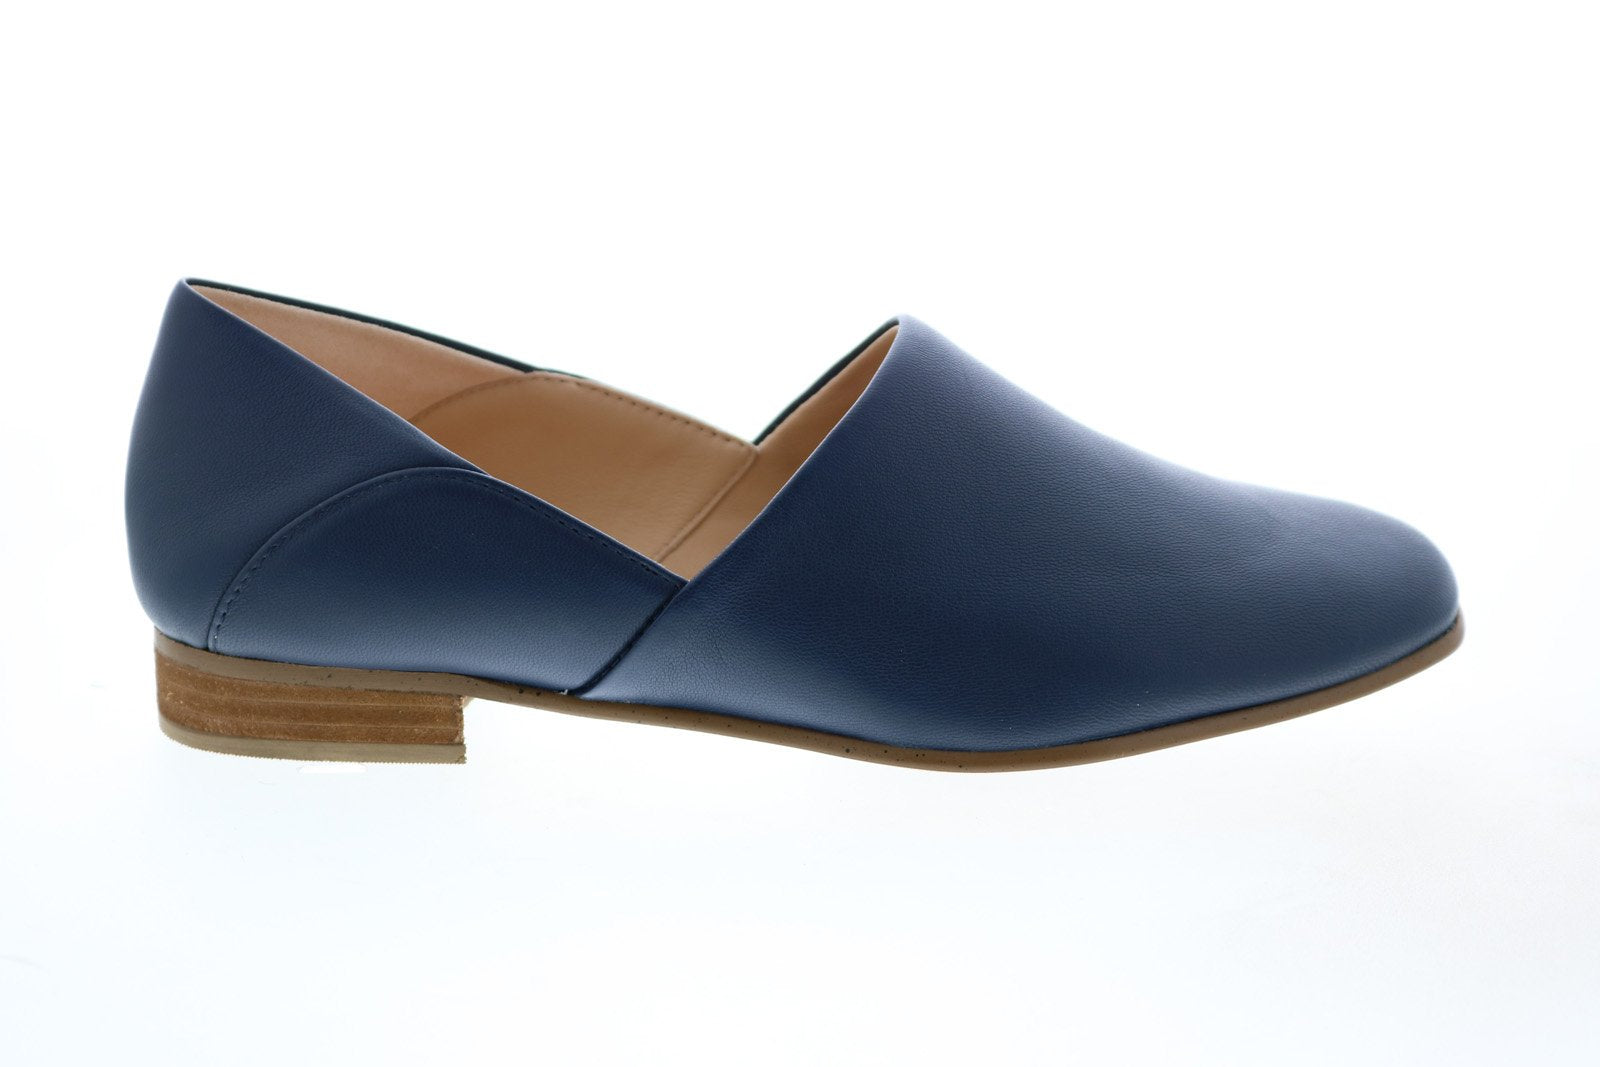 Clarks Pure Womens Blue Leather Slip Loafer Flats Sho - Ruze Shoes